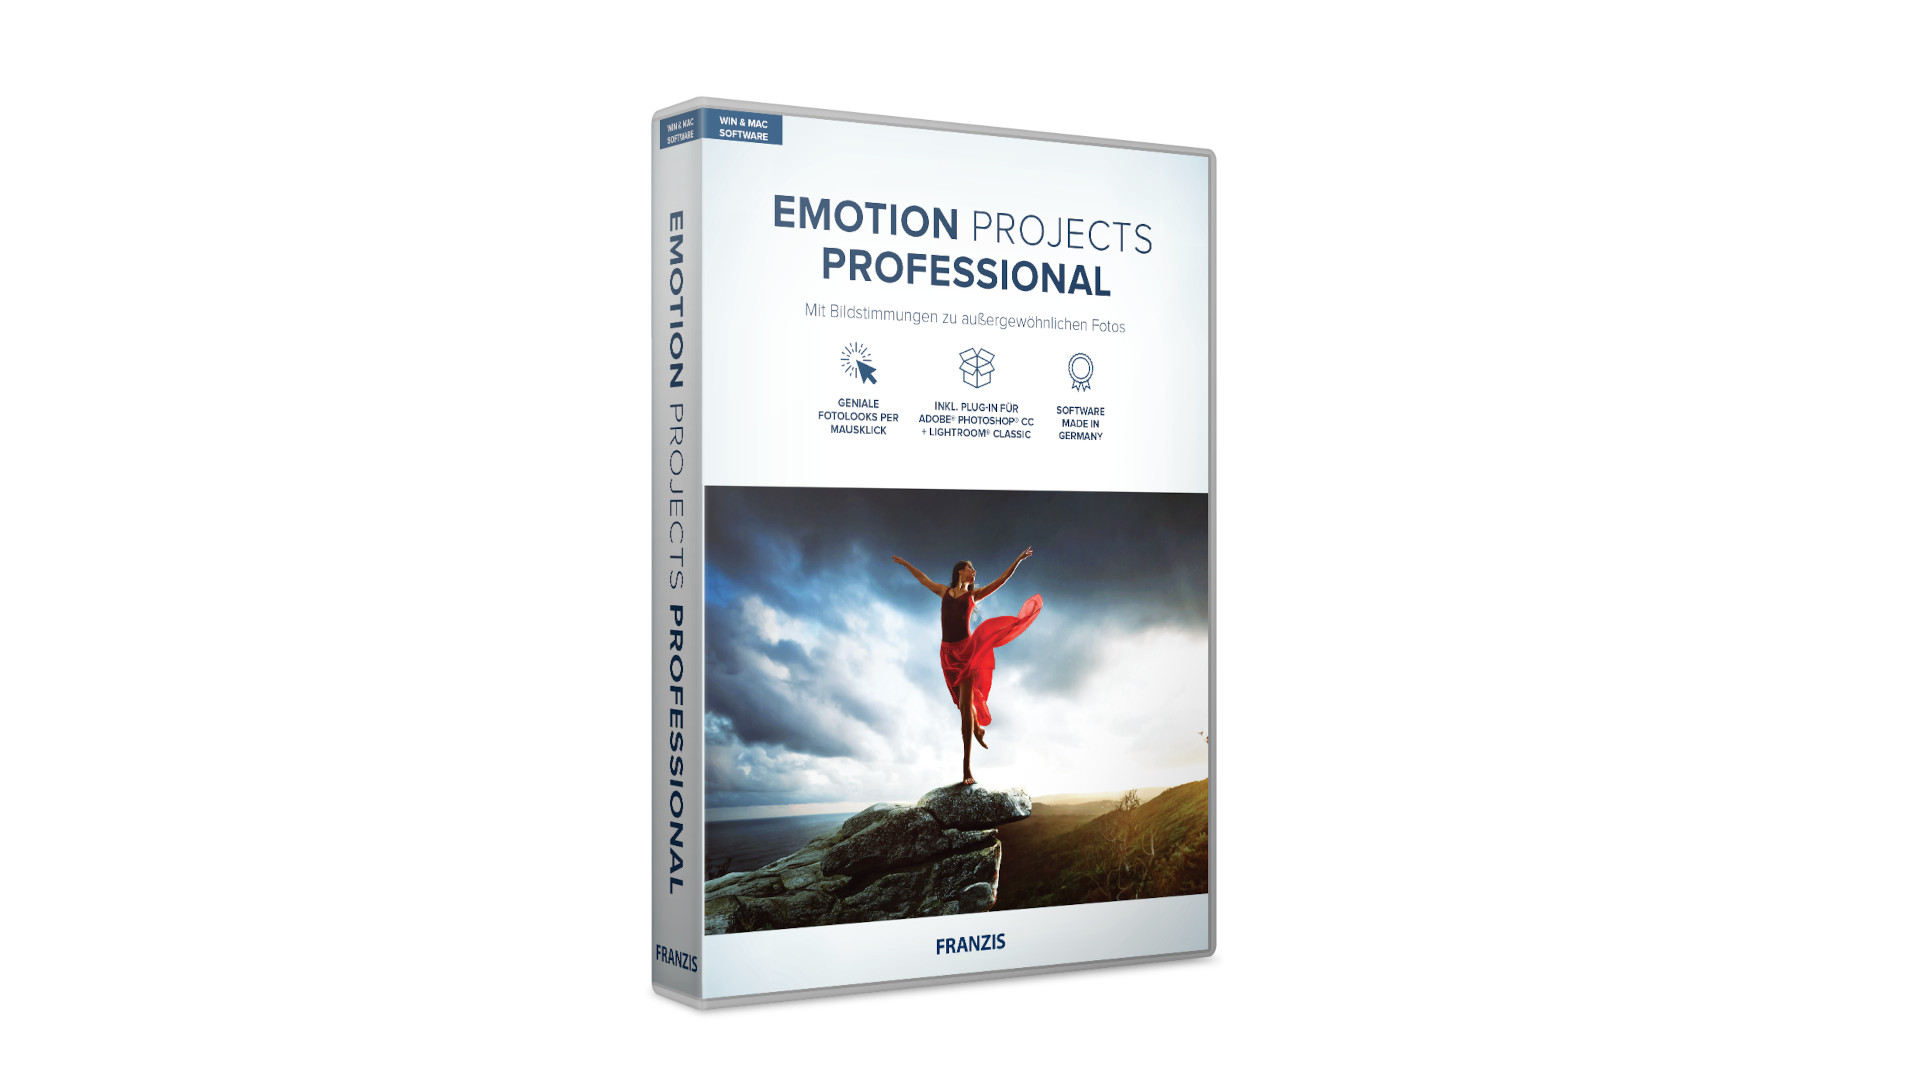 EMOTION Projects Professional - Project Software Key (Lifetime / 1 PC) [USD 33.89]